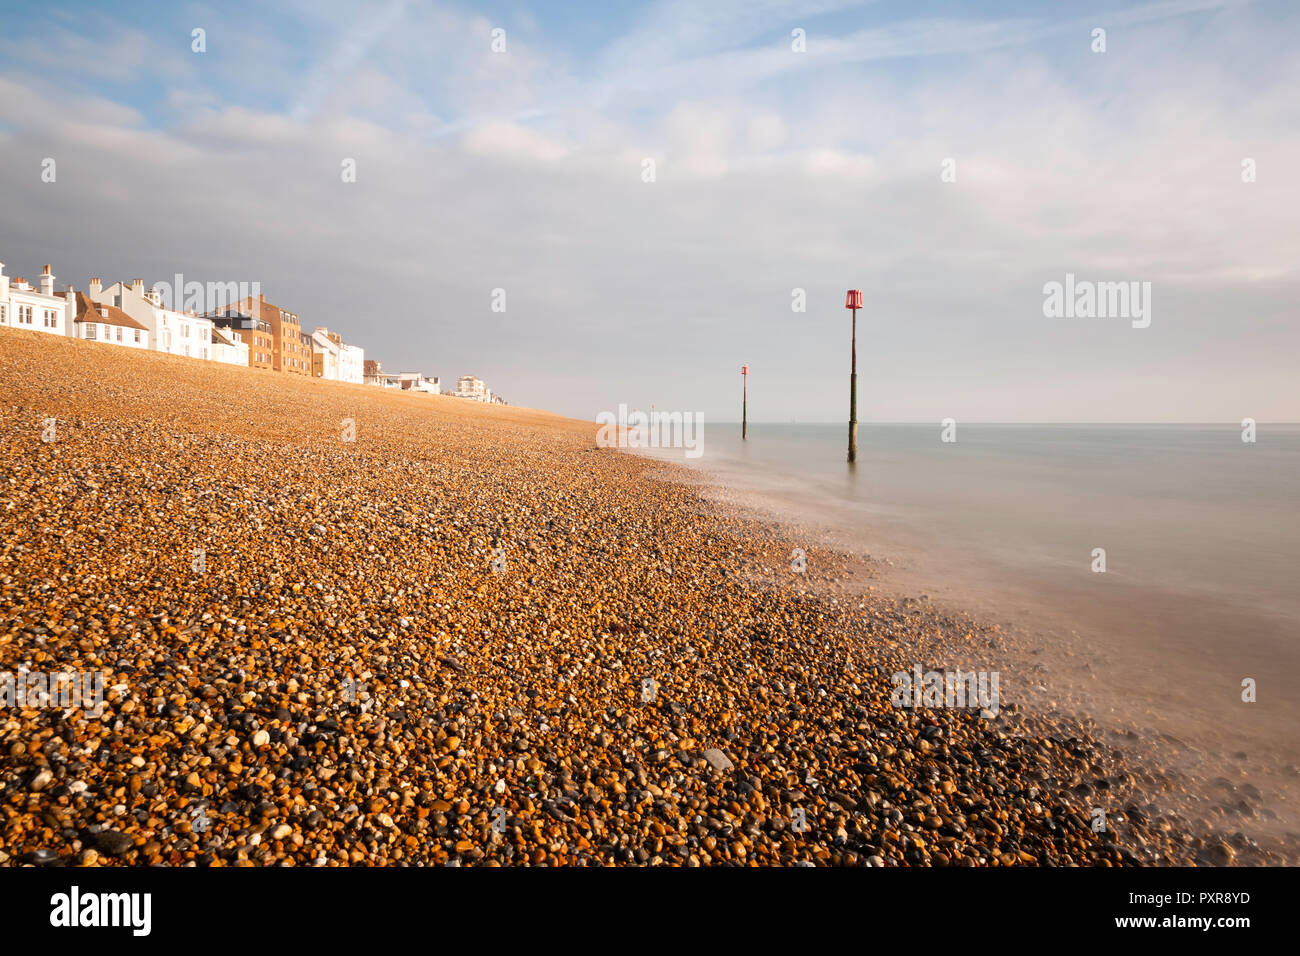 Early morning light on the shingle beach at Deal, Kent, UK. The houses along Beach Street are visible and there are tidal markers in the sea. Stock Photo